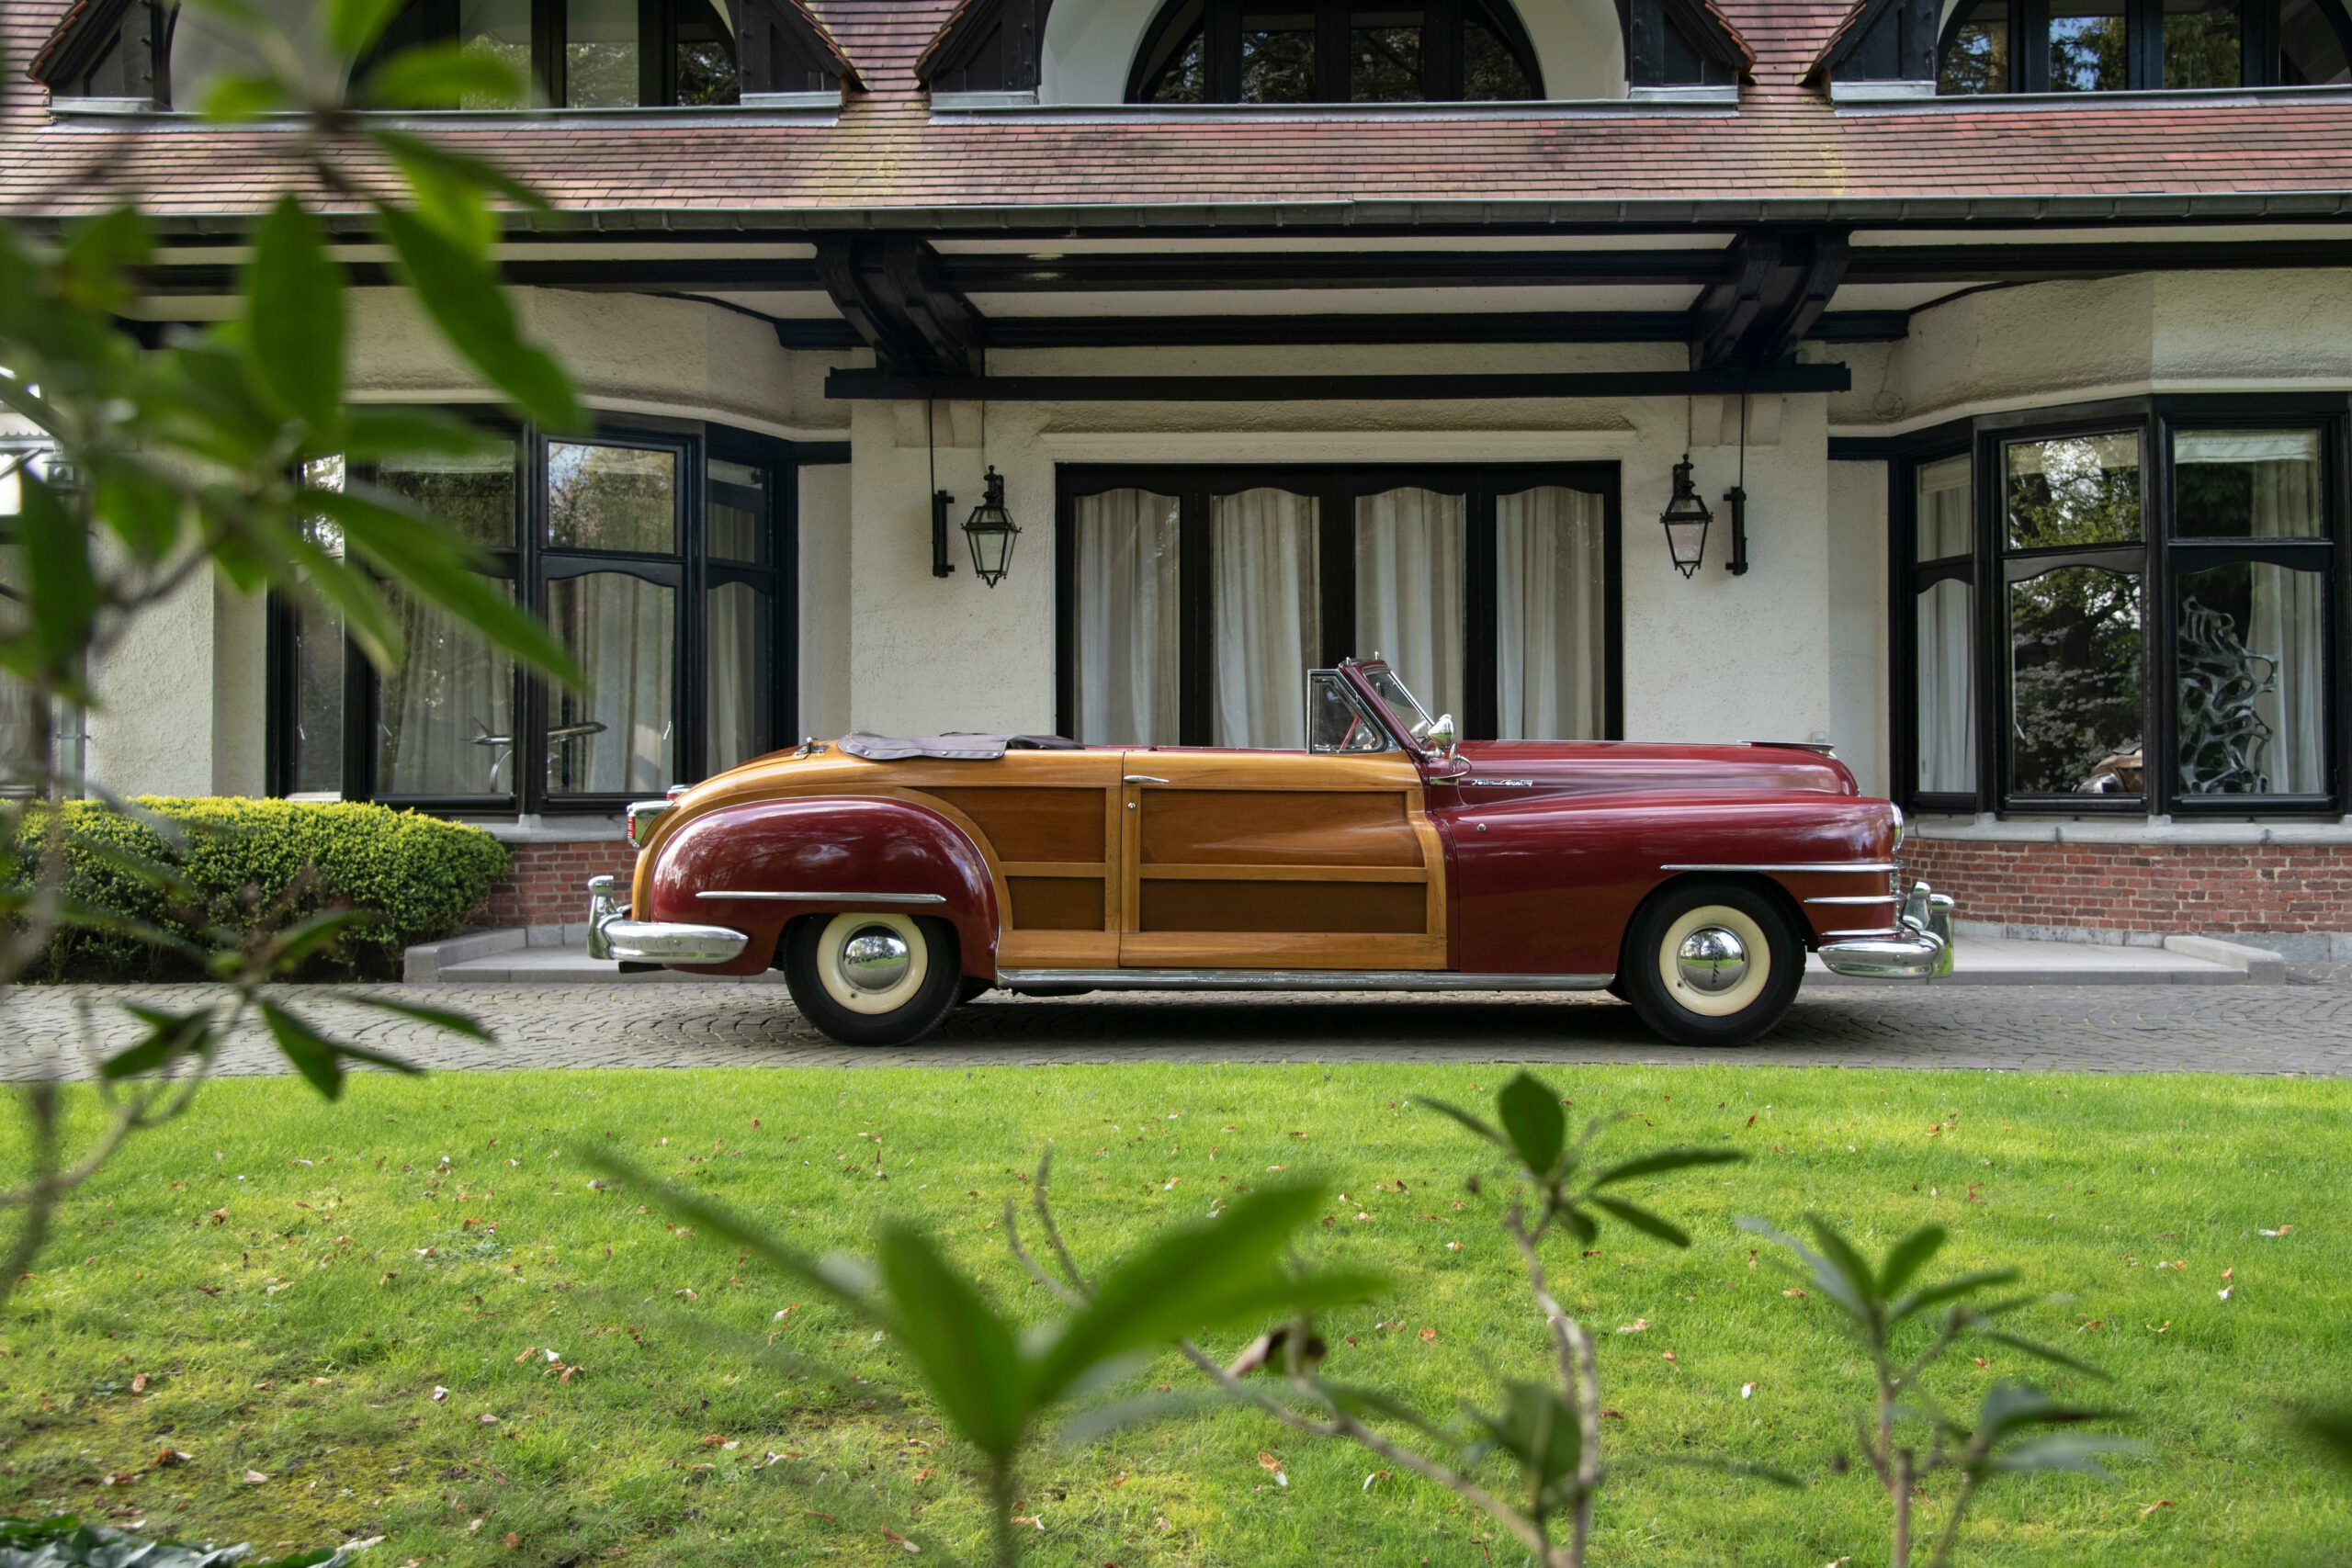 1946 Chrysler New Yorker ‘Town & Country’ Woodie Convertible, 1946 Chrysler New Yorker 'Town & Country' Woodie Convertible, Chrysler, Chrysler New Yorker